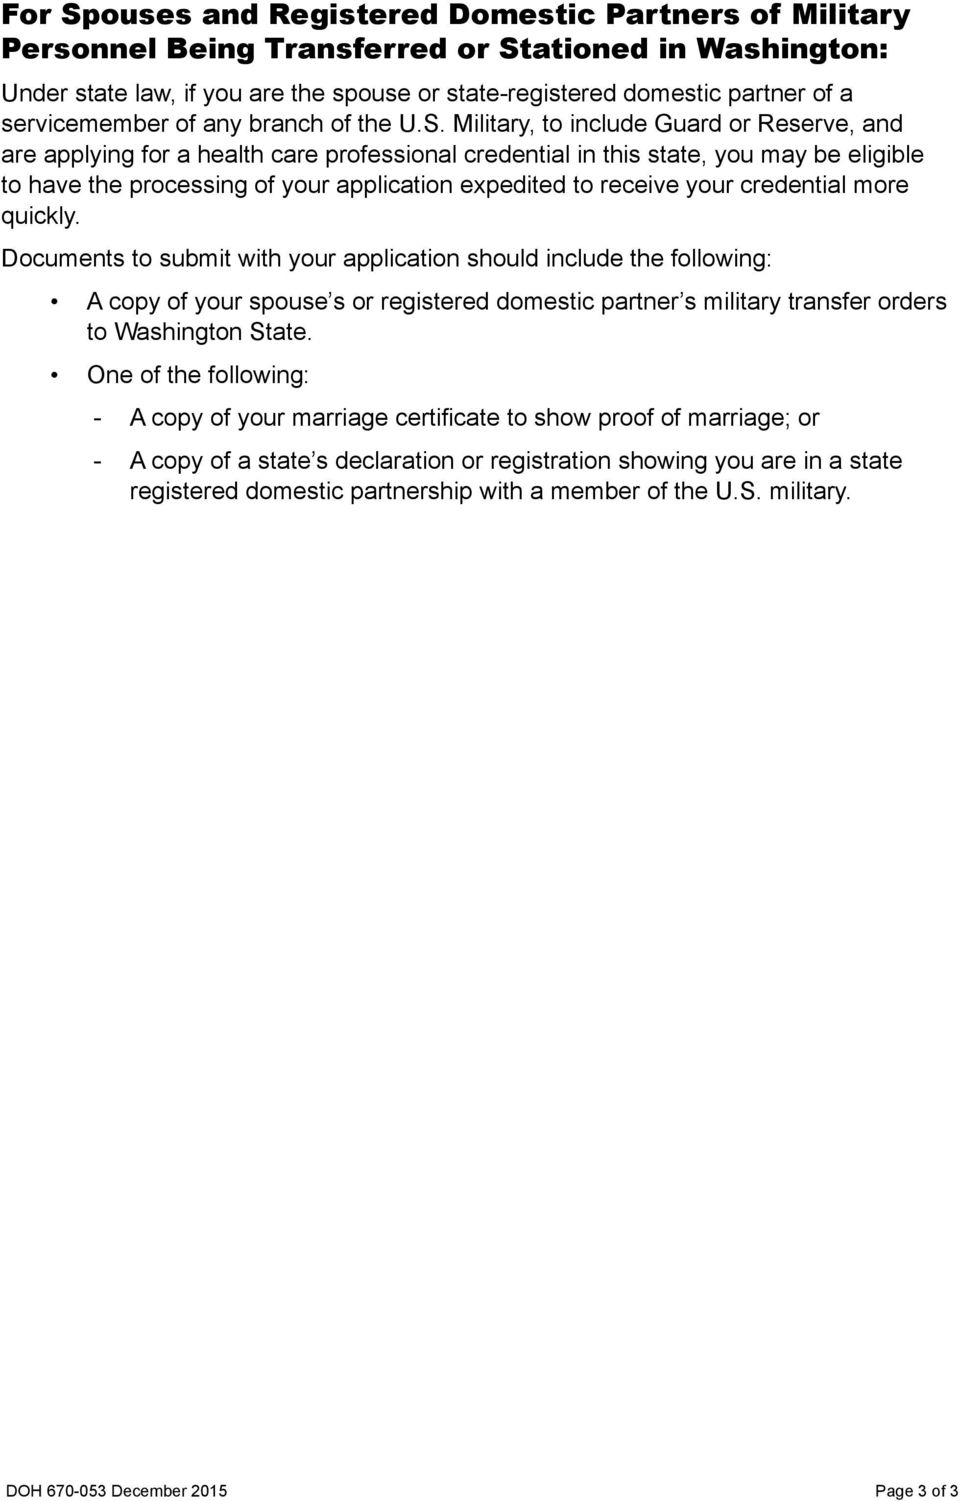 Military, to include Guard or Reserve, and are applying for a health care professional credential in this state, you may be eligible to have the processing of your application expedited to receive